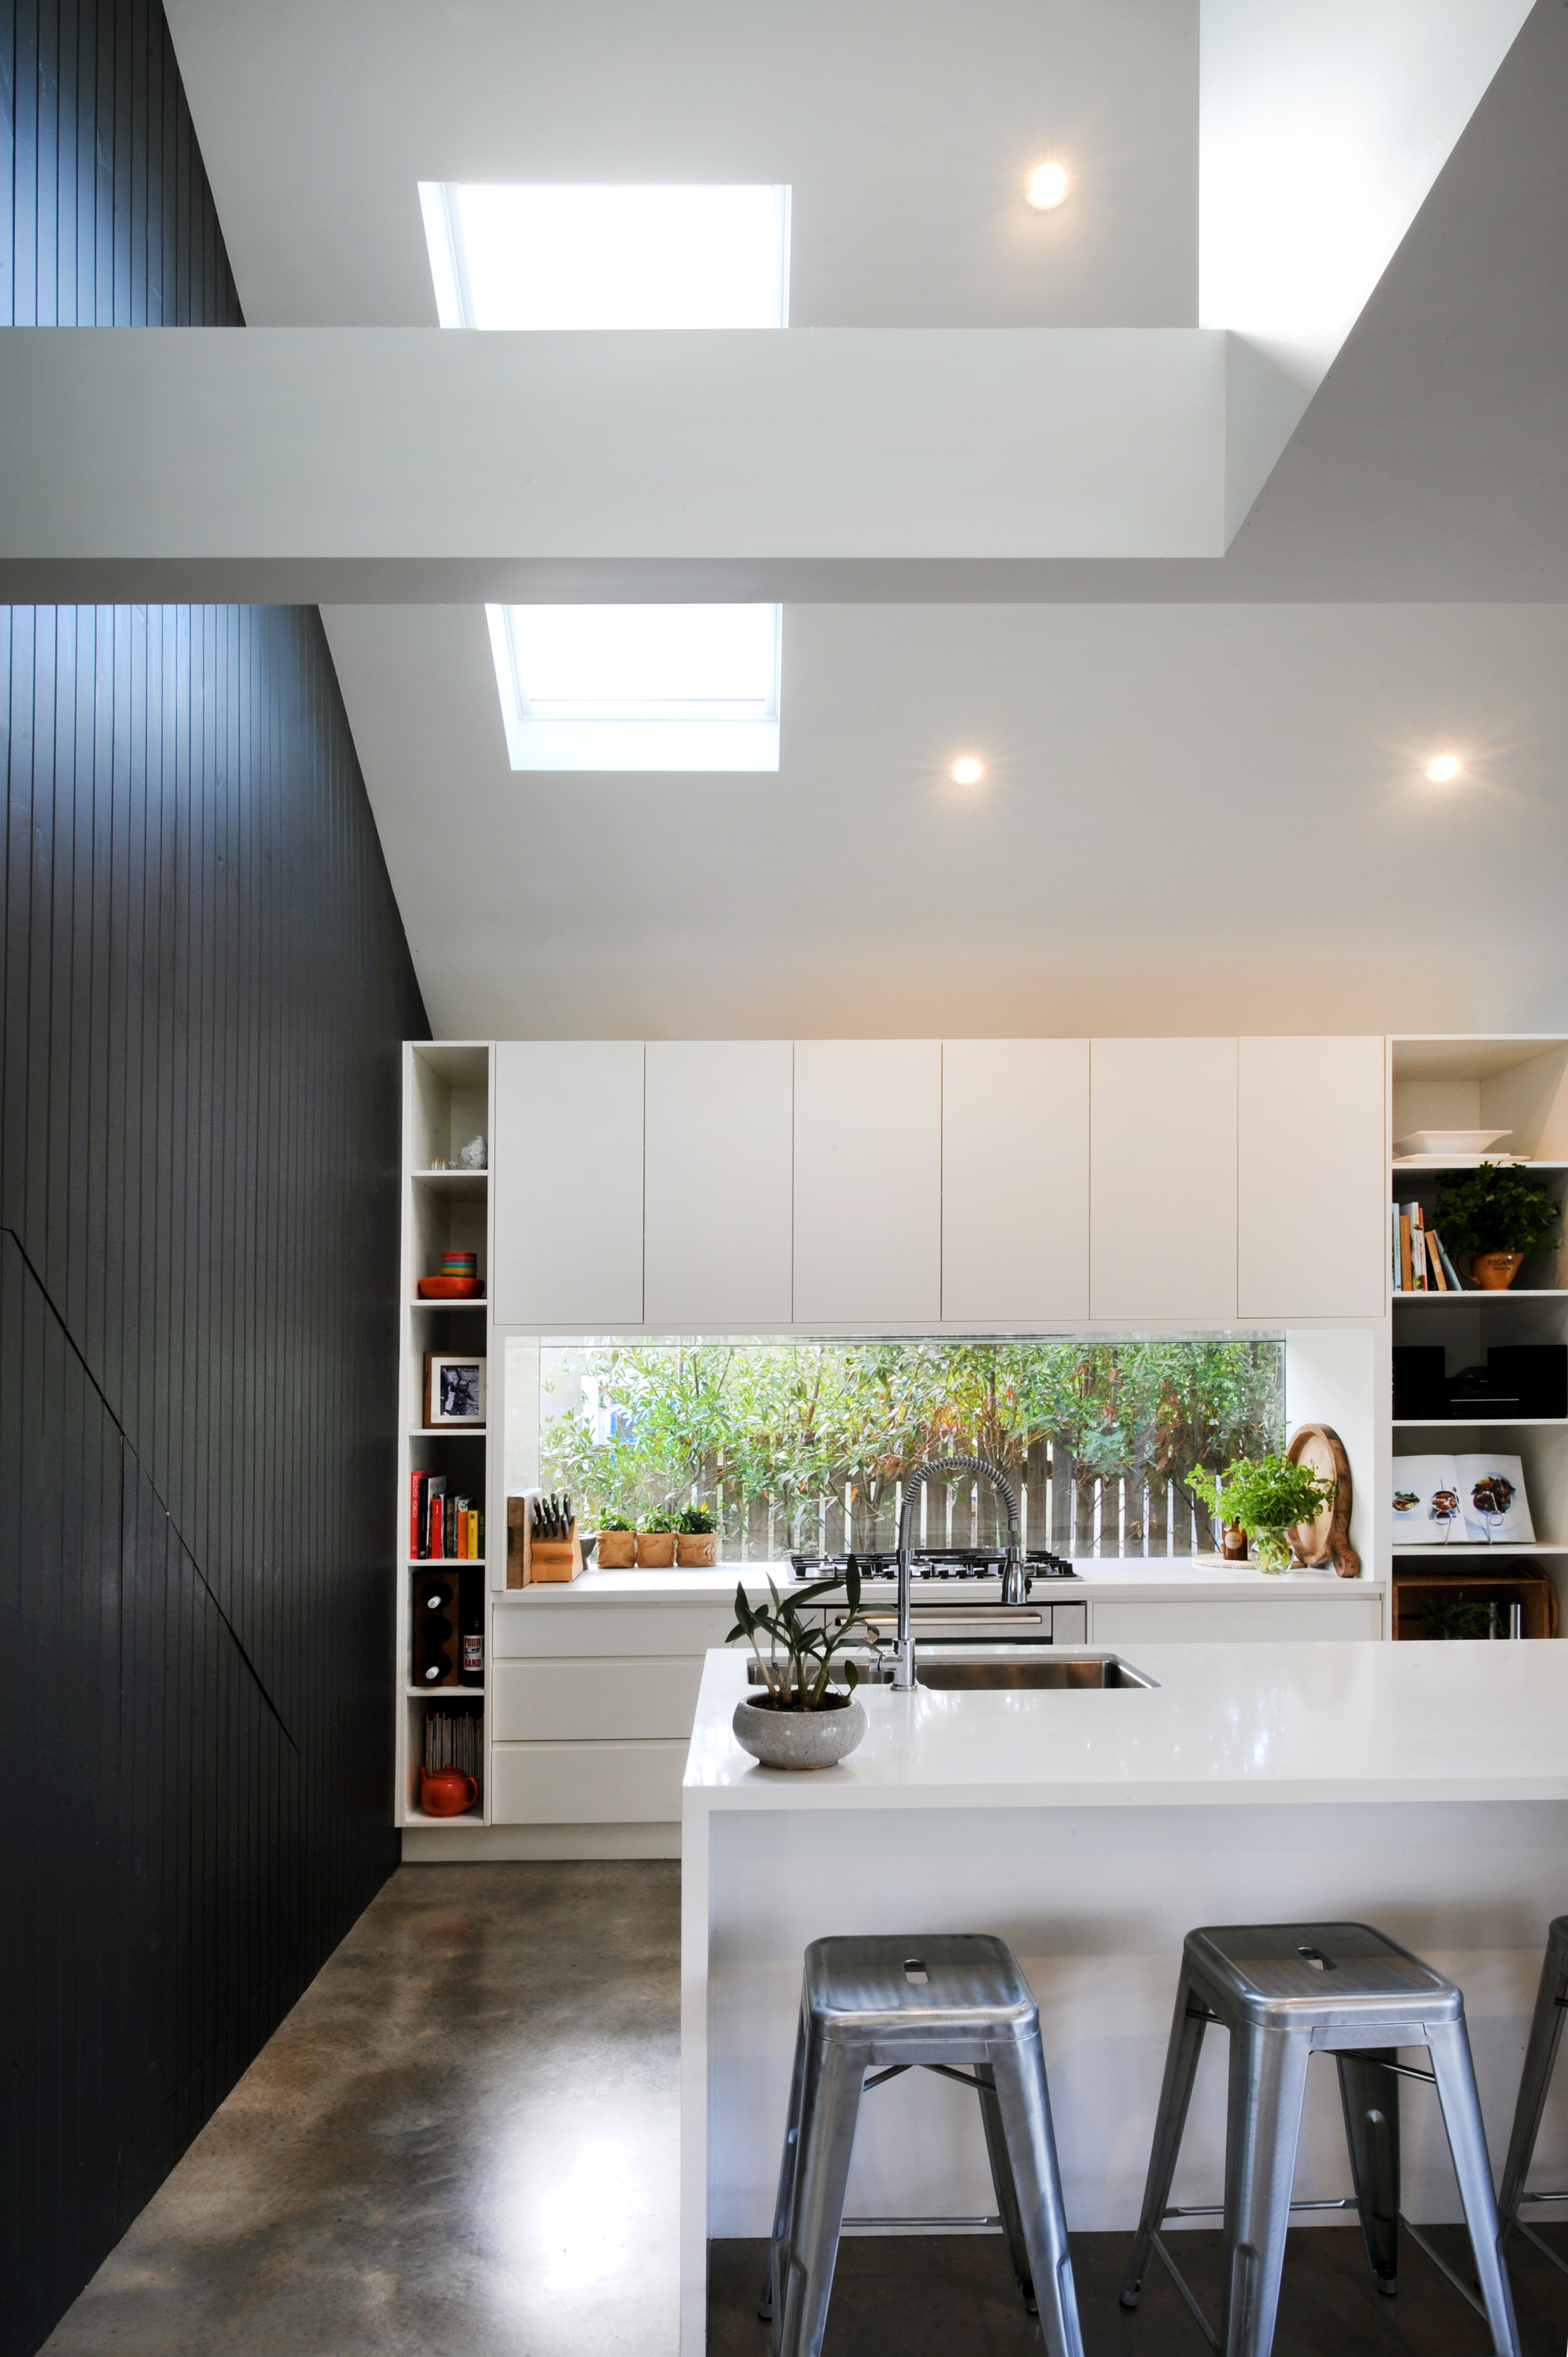 Cameron Anderson Architects – Gladstone street residence